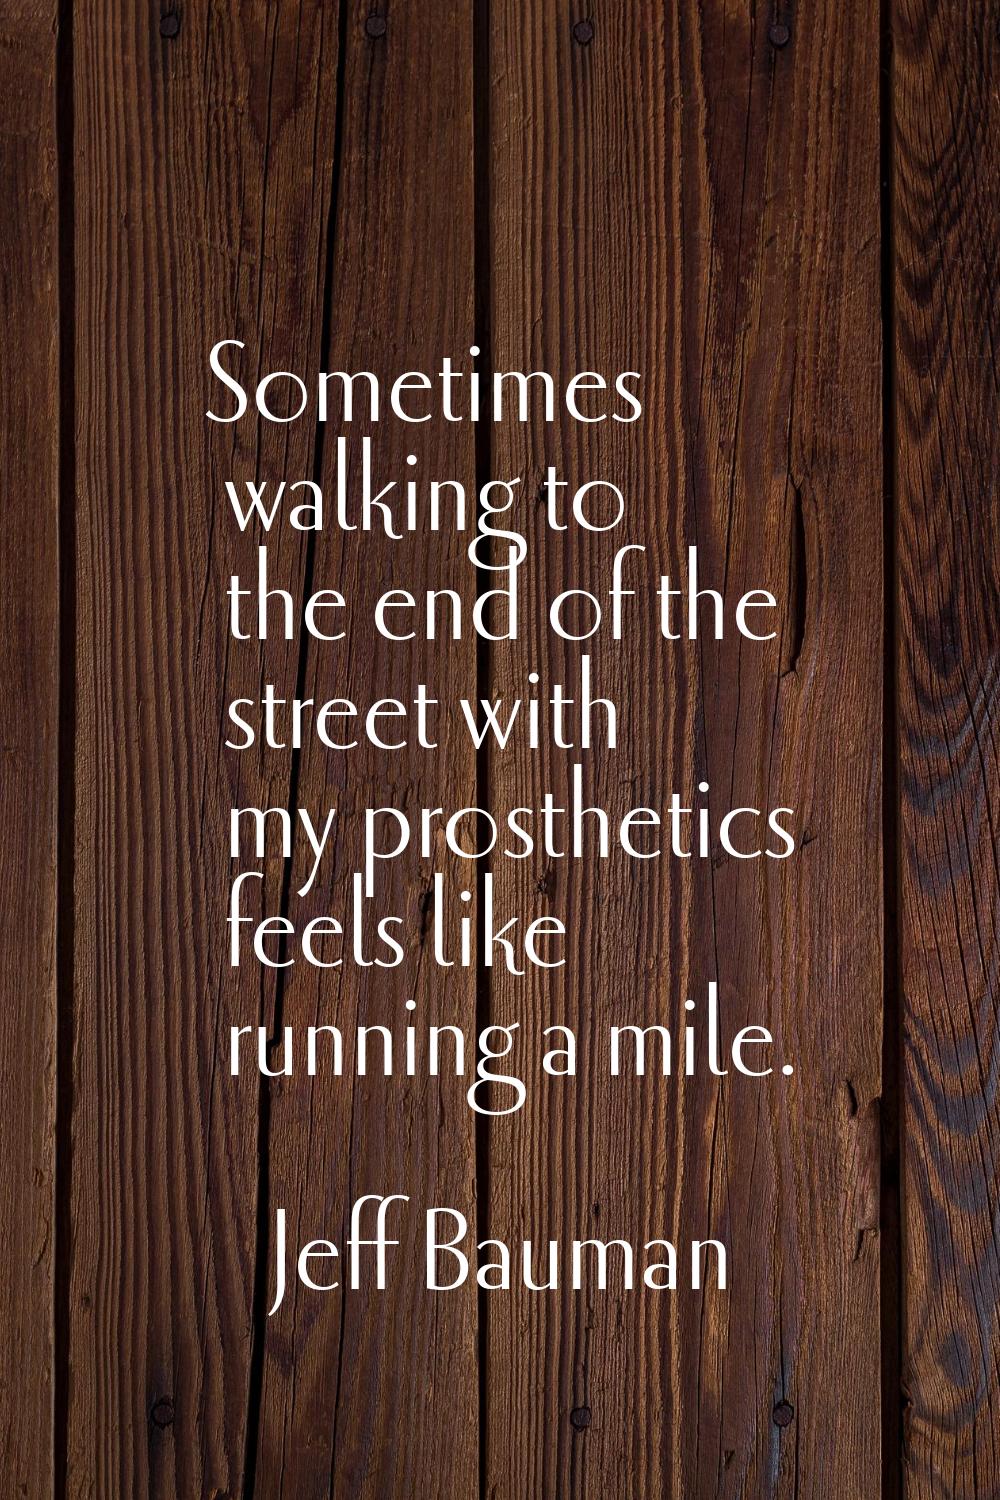 Sometimes walking to the end of the street with my prosthetics feels like running a mile.